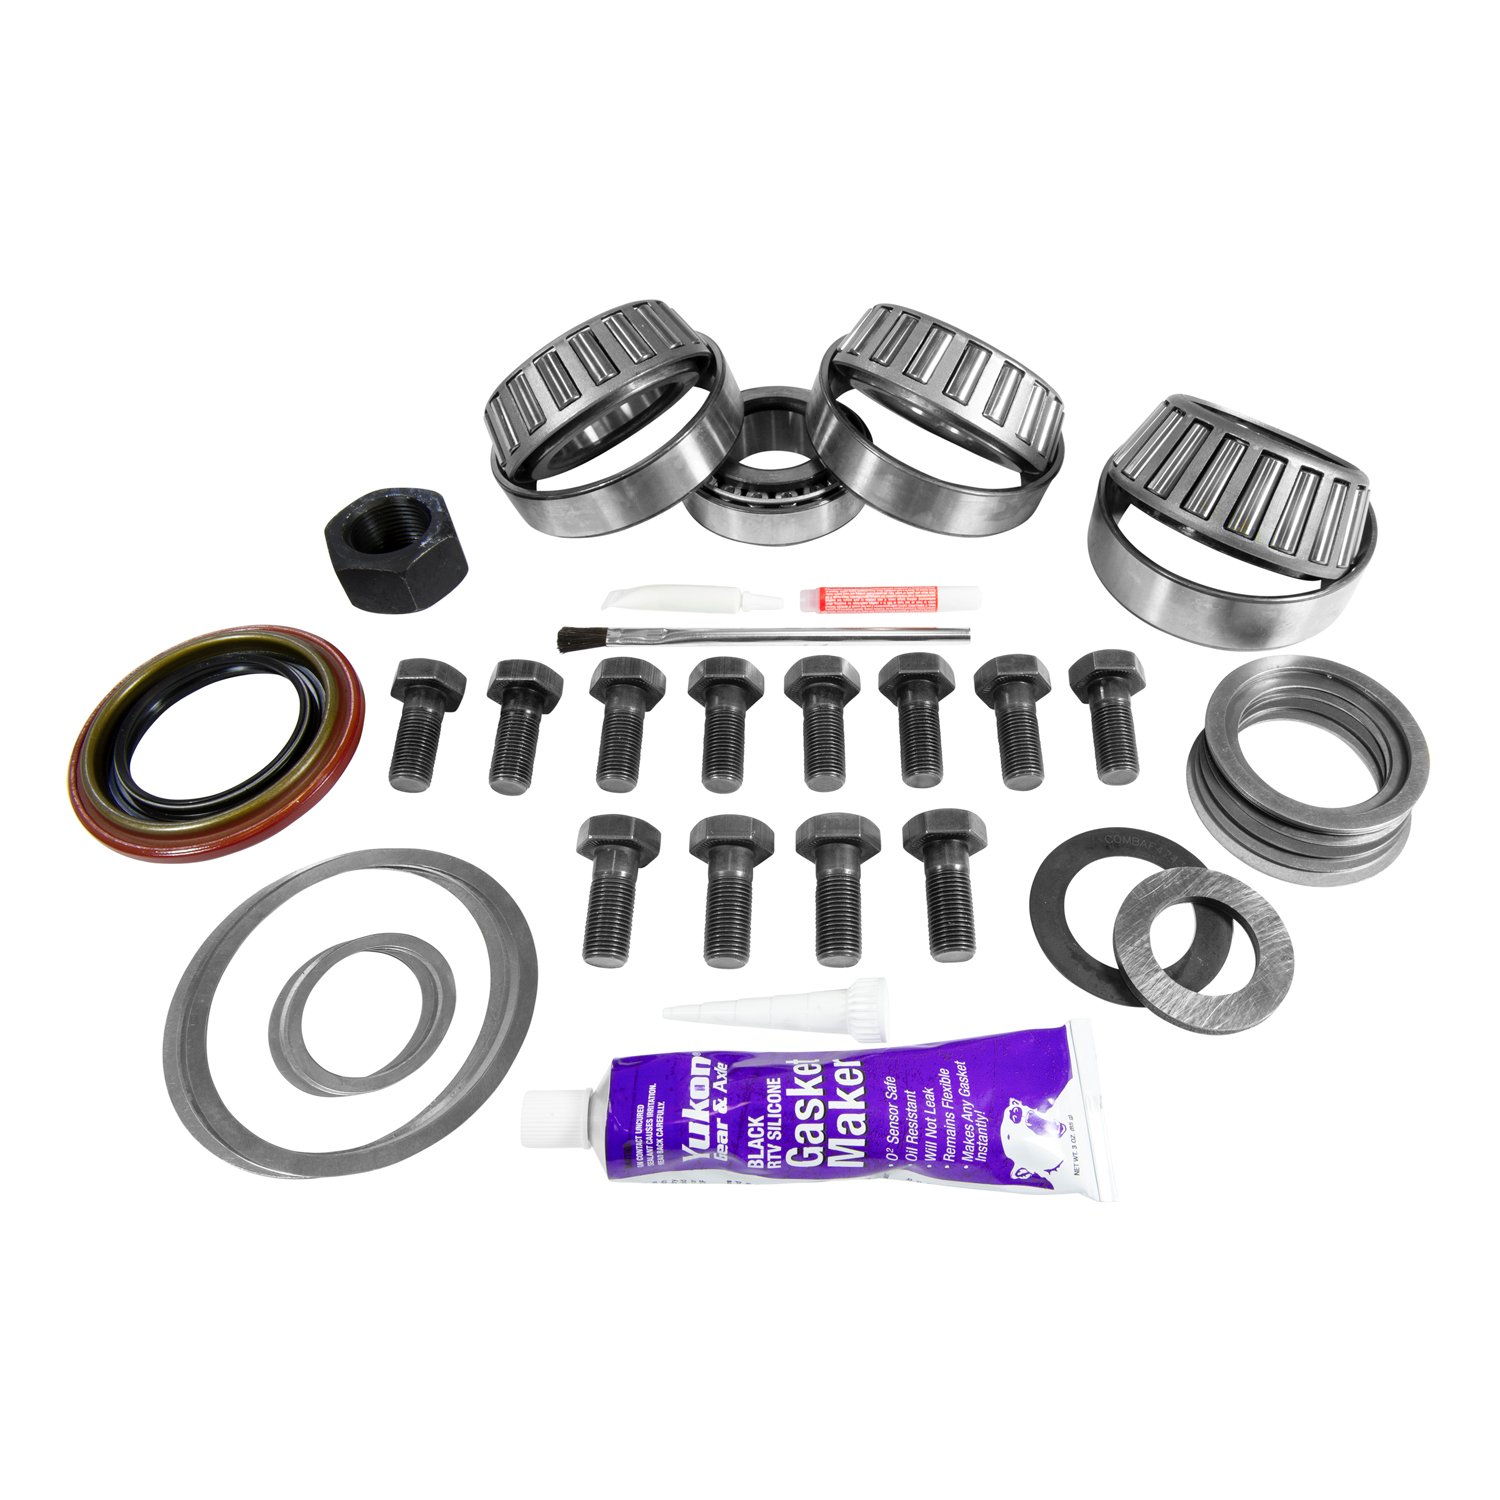 USA Standard ZK D80-A Master Overhaul Kit, For The Dana 80 Differential (4.125 in. Od Only).